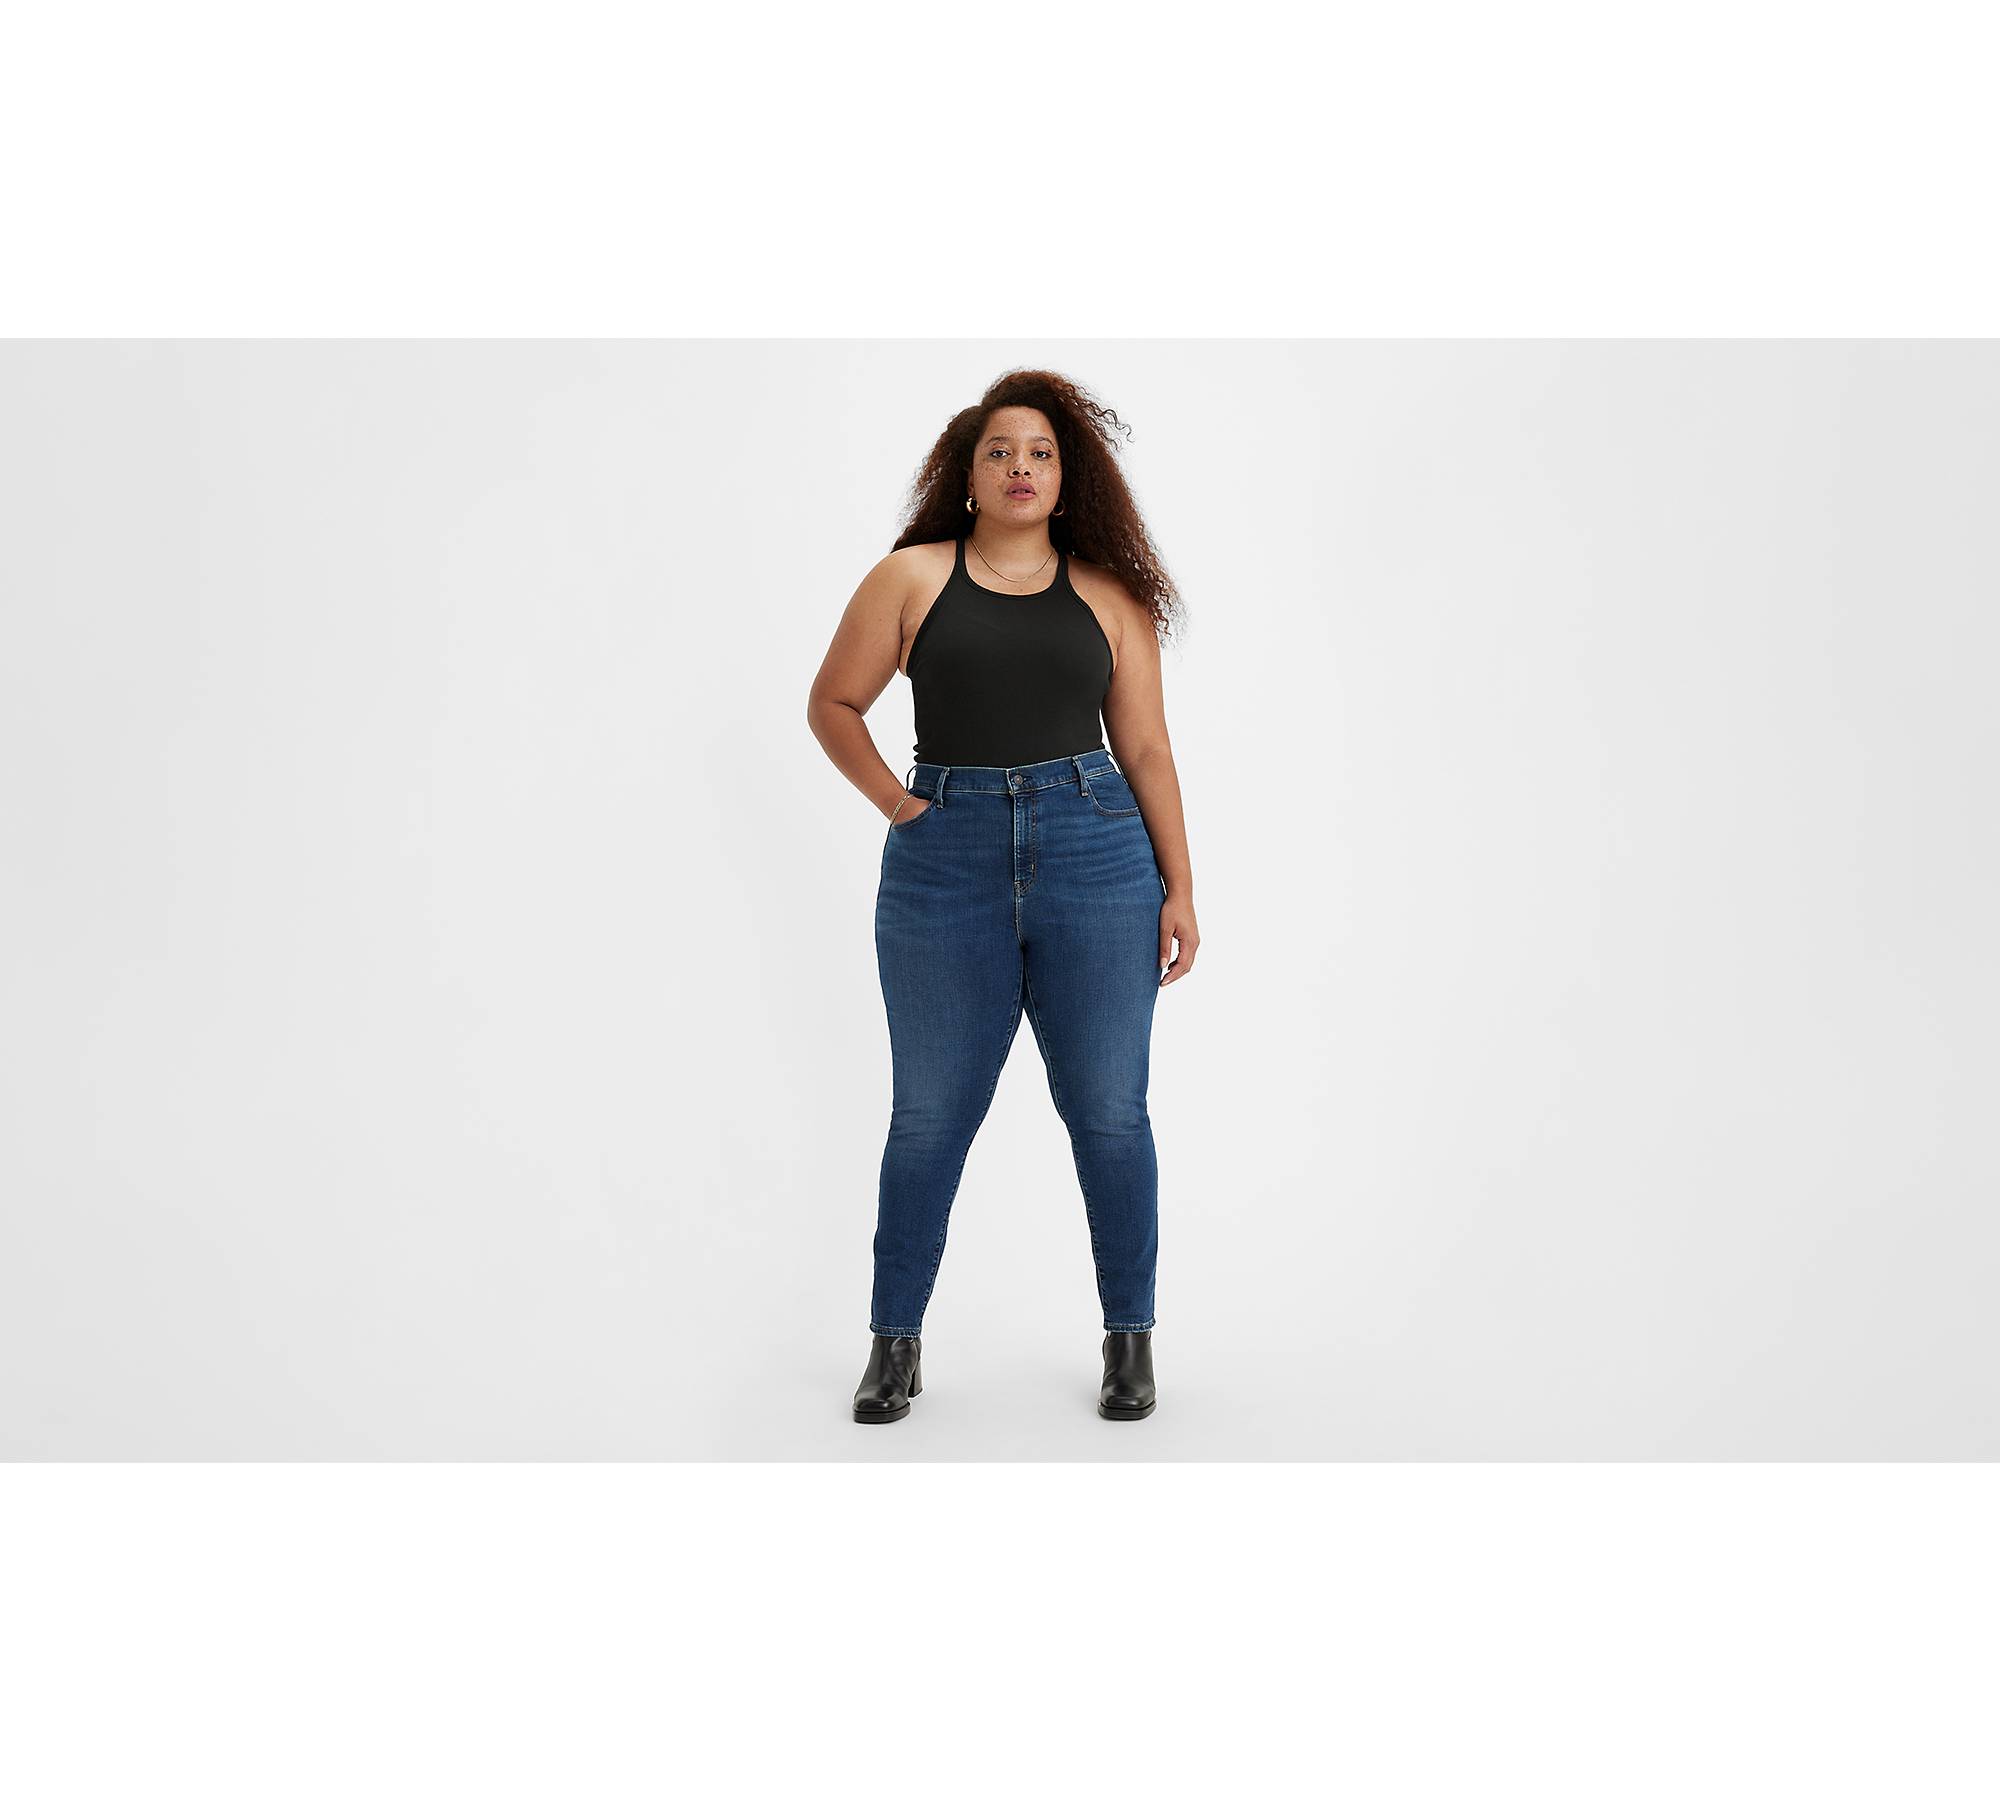 Jean Levis Mujer 721 High Rise Skinny Blue Story Performance